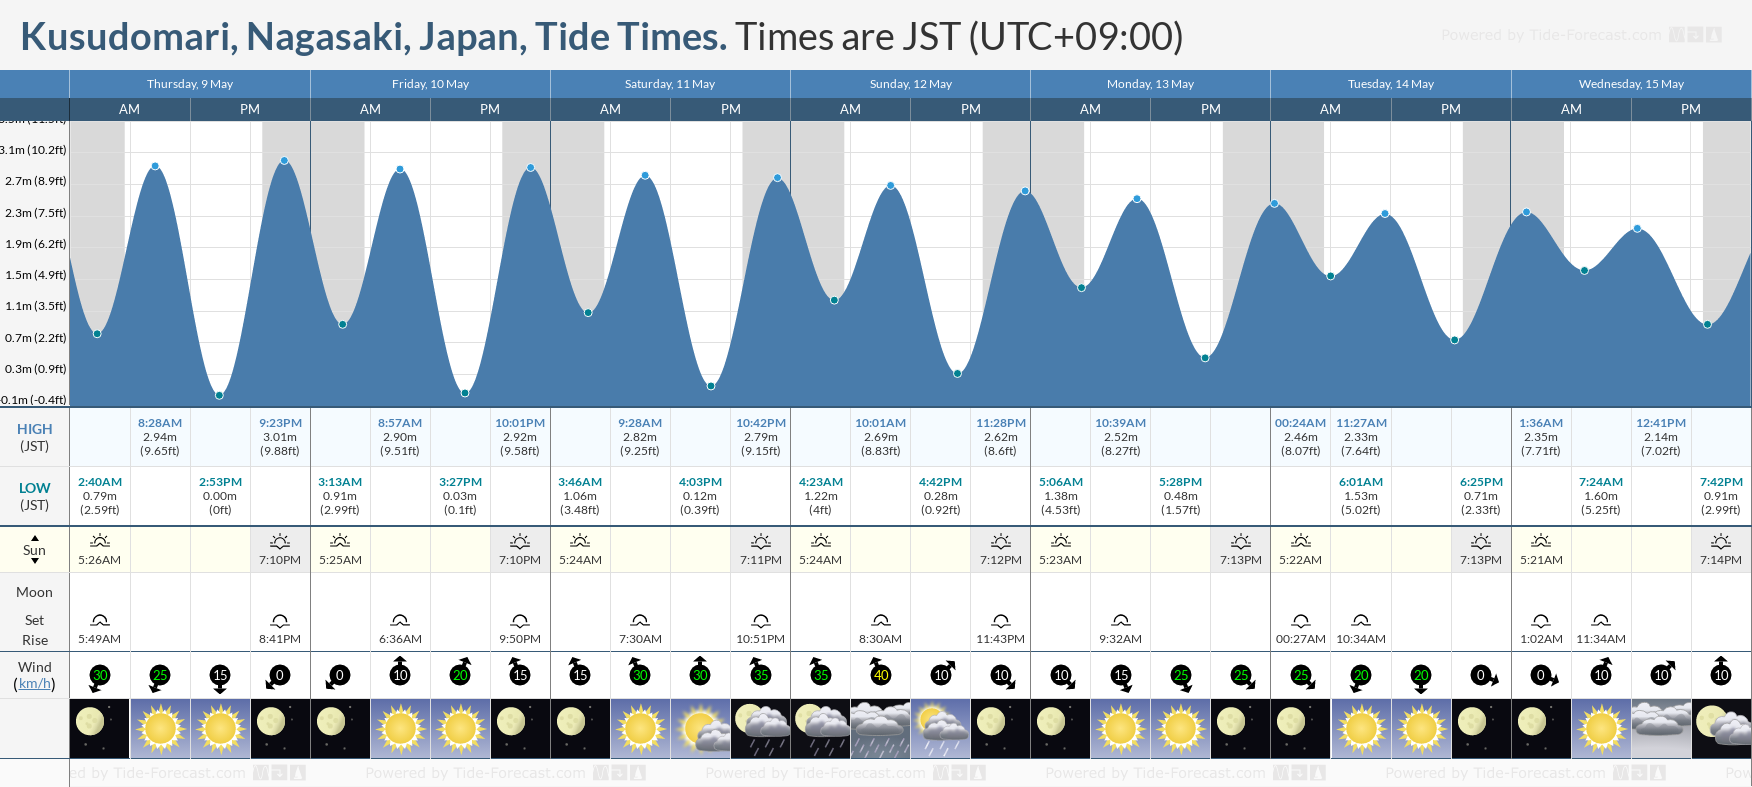 Kusudomari, Nagasaki, Japan Tide Chart including high and low tide times for the next 7 days